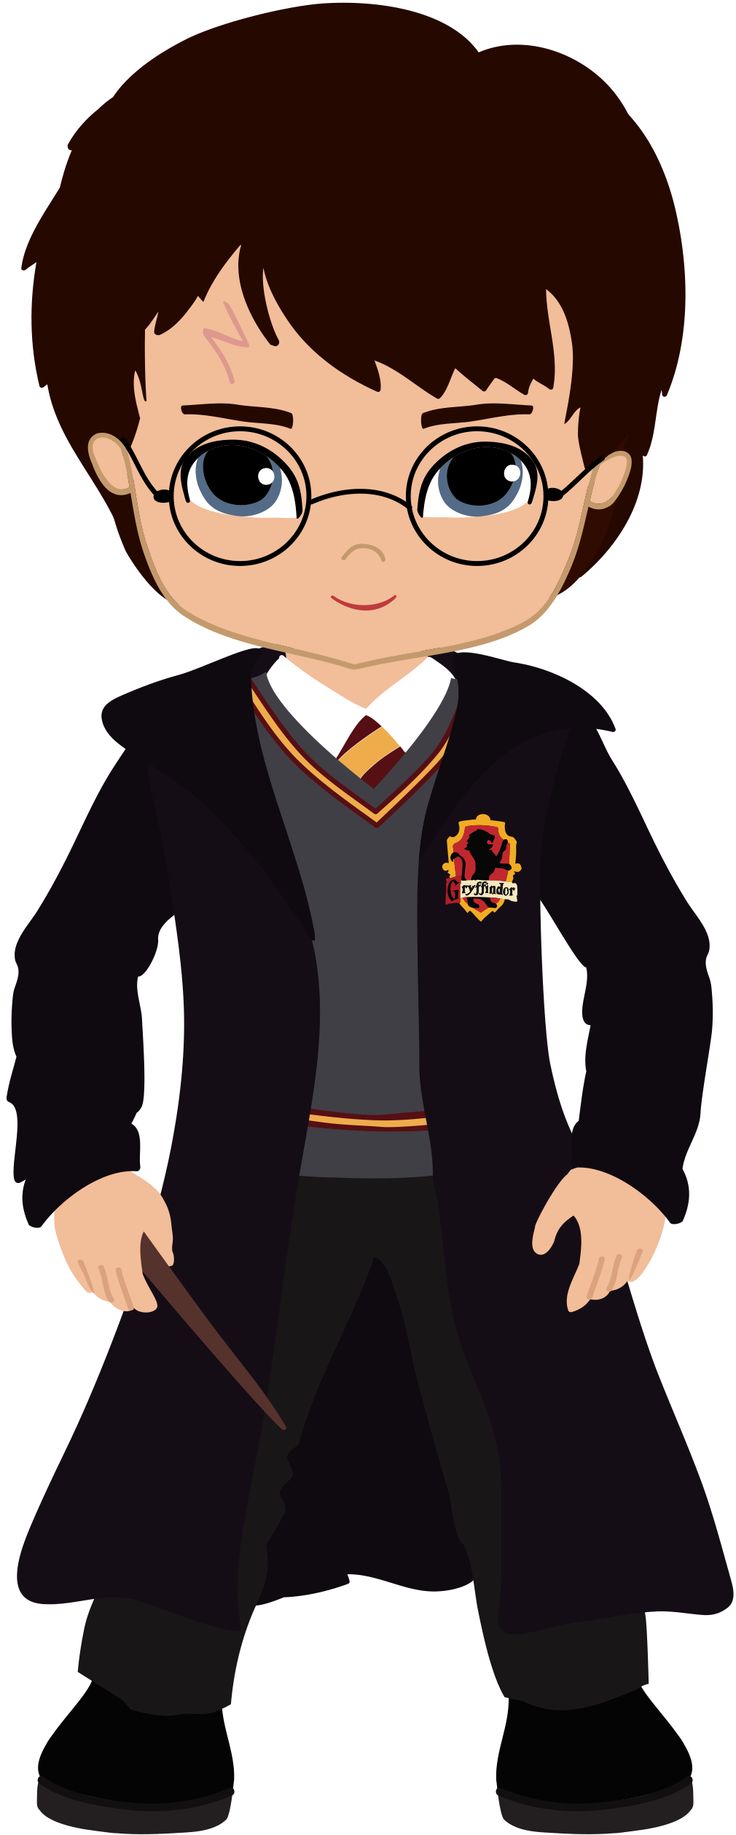 Harry potter free clipart cliparts and others art inspiration - Clipartix